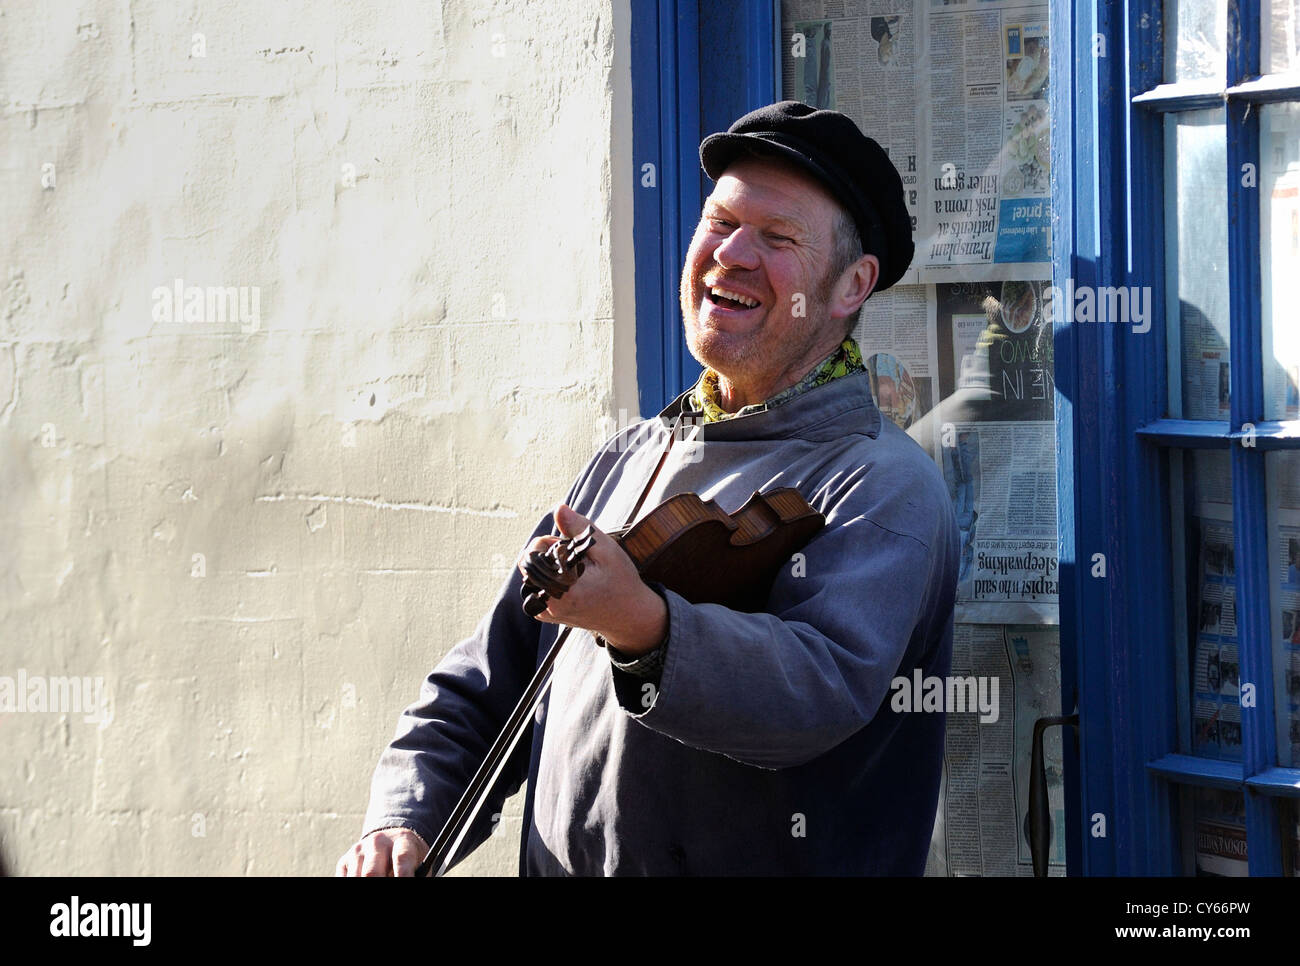 Street busker playing a musical instrument and entertaining the general public for money in the narrow streets on Whitby. Stock Photo